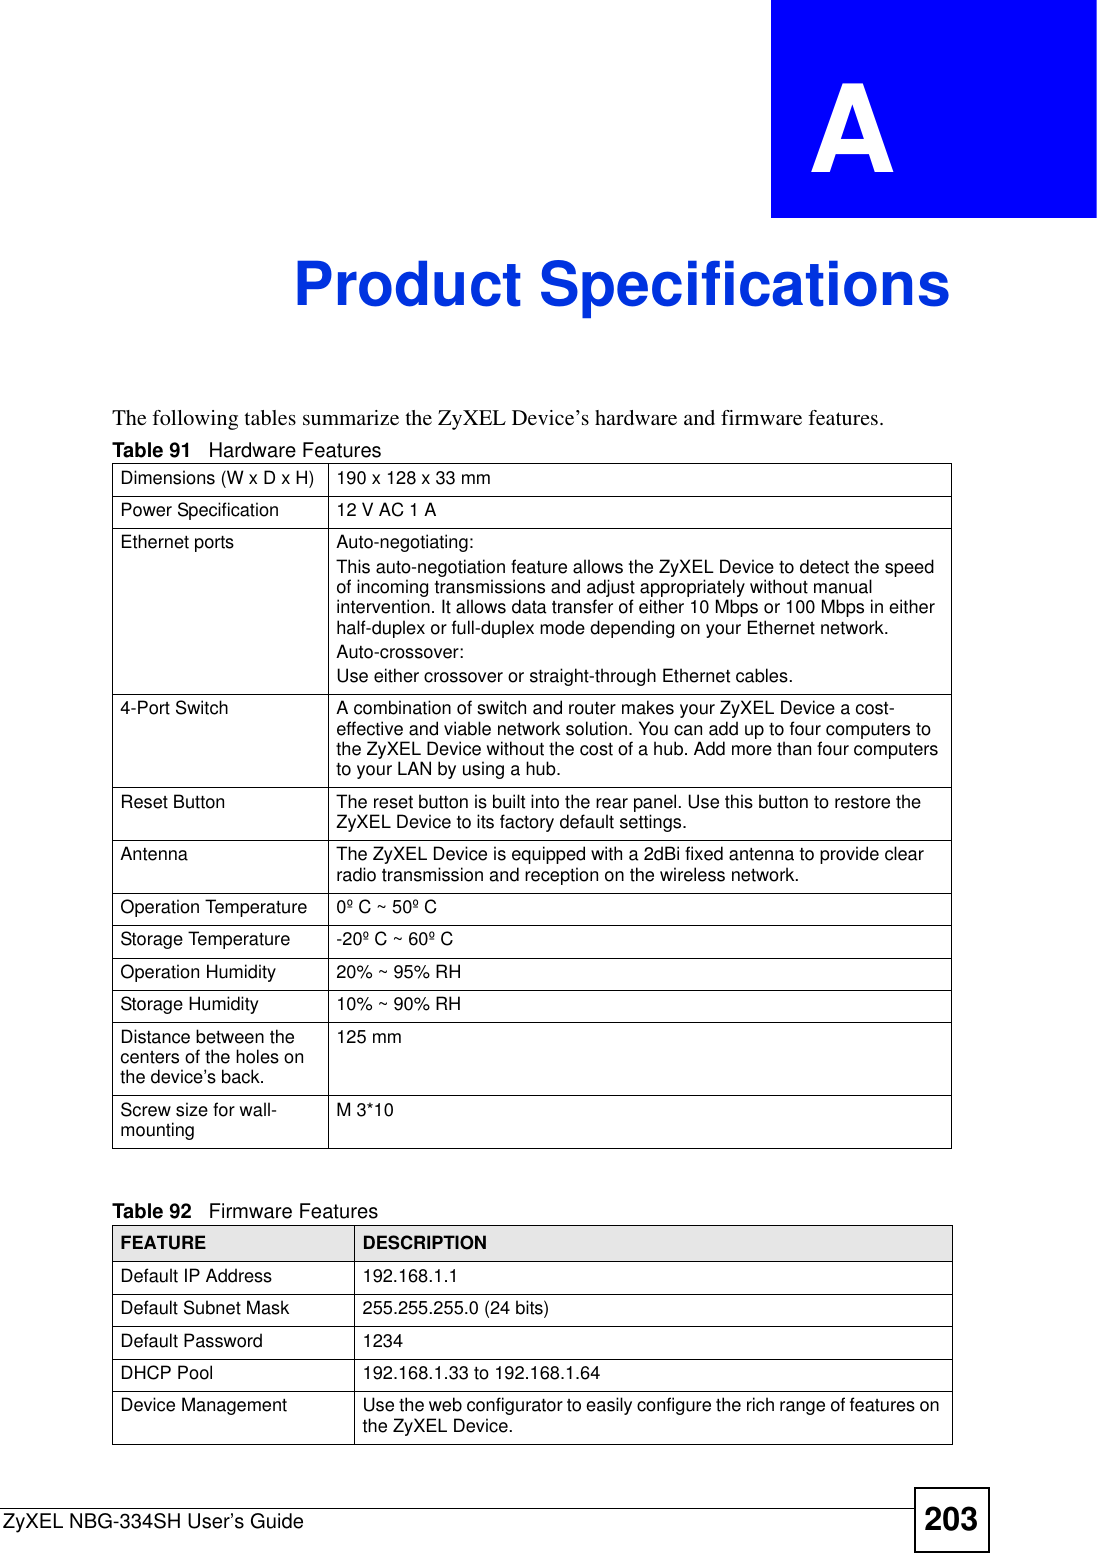 ZyXEL NBG-334SH User’s Guide 203APPENDIX  A Product SpecificationsThe following tables summarize the ZyXEL Device’s hardware and firmware features.Table 91   Hardware FeaturesDimensions (W x D x H)  190 x 128 x 33 mmPower Specification 12 V AC 1 AEthernet ports Auto-negotiating: This auto-negotiation feature allows the ZyXEL Device to detect the speed of incoming transmissions and adjust appropriately without manual intervention. It allows data transfer of either 10 Mbps or 100 Mbps in either half-duplex or full-duplex mode depending on your Ethernet network.Auto-crossover:Use either crossover or straight-through Ethernet cables.4-Port Switch A combination of switch and router makes your ZyXEL Device a cost-effective and viable network solution. You can add up to four computers to the ZyXEL Device without the cost of a hub. Add more than four computers to your LAN by using a hub.Reset Button The reset button is built into the rear panel. Use this button to restore the ZyXEL Device to its factory default settings.Antenna The ZyXEL Device is equipped with a 2dBi fixed antenna to provide clear radio transmission and reception on the wireless network. Operation Temperature 0º C ~ 50º CStorage Temperature -20º C ~ 60º COperation Humidity 20% ~ 95% RHStorage Humidity 10% ~ 90% RHDistance between the centers of the holes on the device’s back.125 mmScrew size for wall-mounting M 3*10Table 92   Firmware FeaturesFEATURE DESCRIPTIONDefault IP Address 192.168.1.1Default Subnet Mask 255.255.255.0 (24 bits)Default Password 1234DHCP Pool 192.168.1.33 to 192.168.1.64 Device Management Use the web configurator to easily configure the rich range of features on the ZyXEL Device.